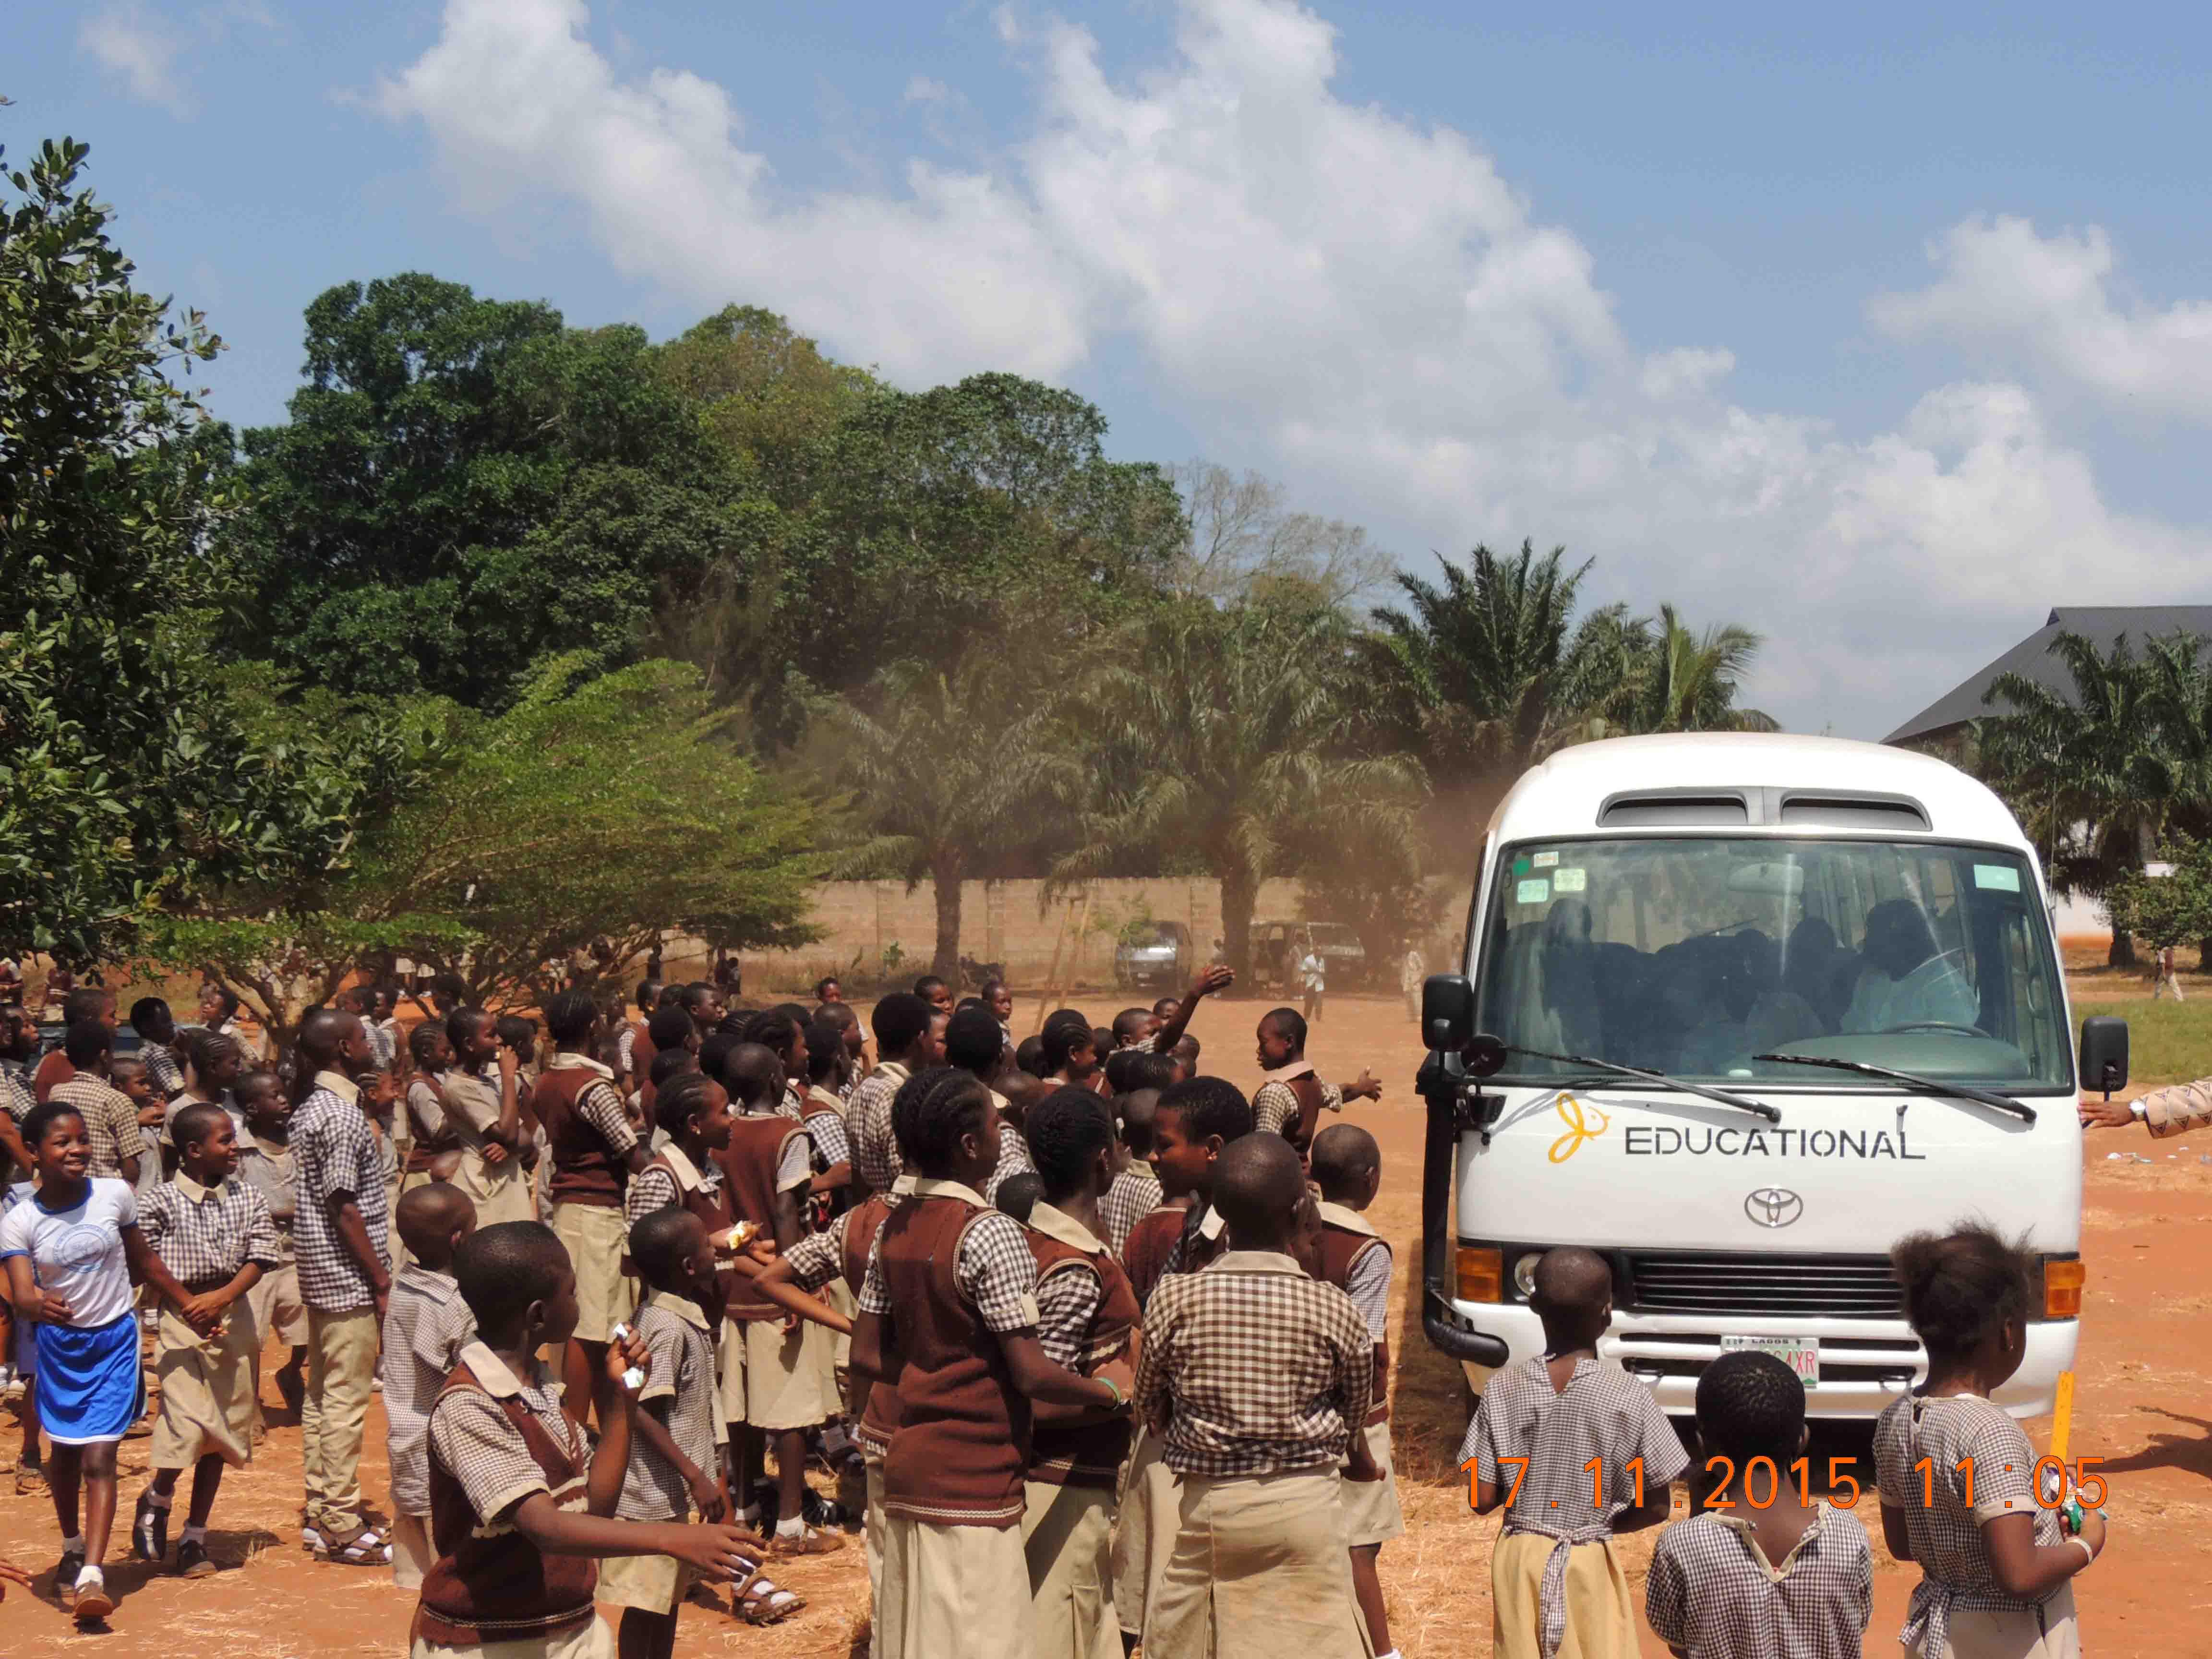 2 school buses for the Holy Trinity School in Nigeria - Child & Family Foundation 